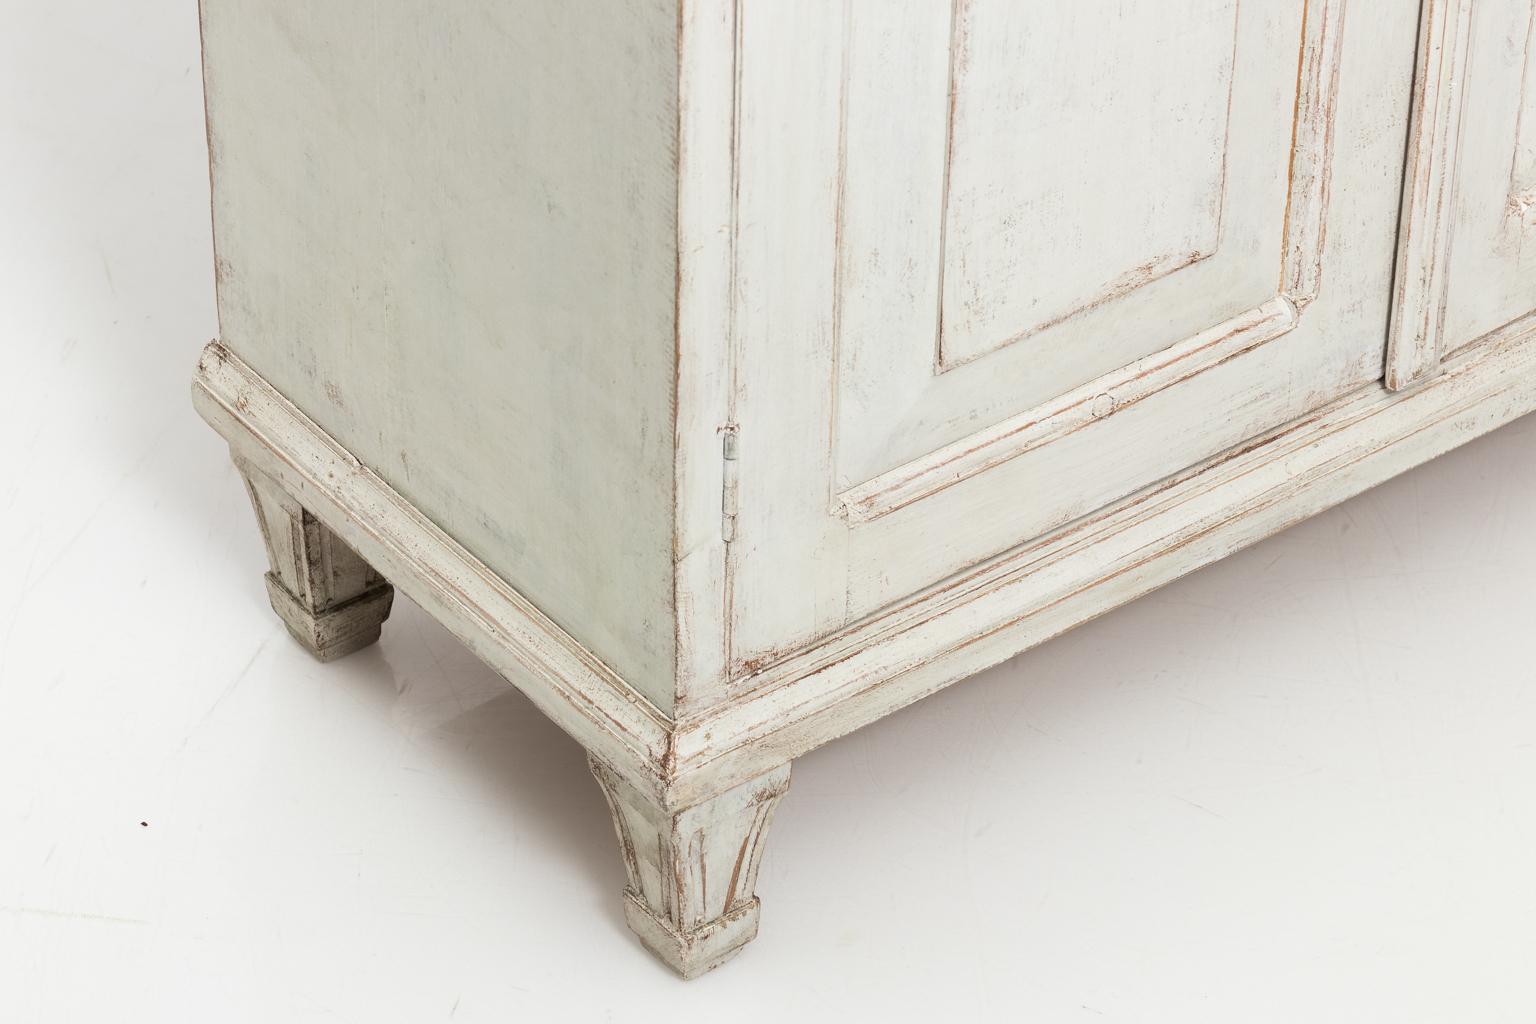 Swedish painted buffet table with four doors and drawers, circa 1860s. The piece comes with a working lock and key.